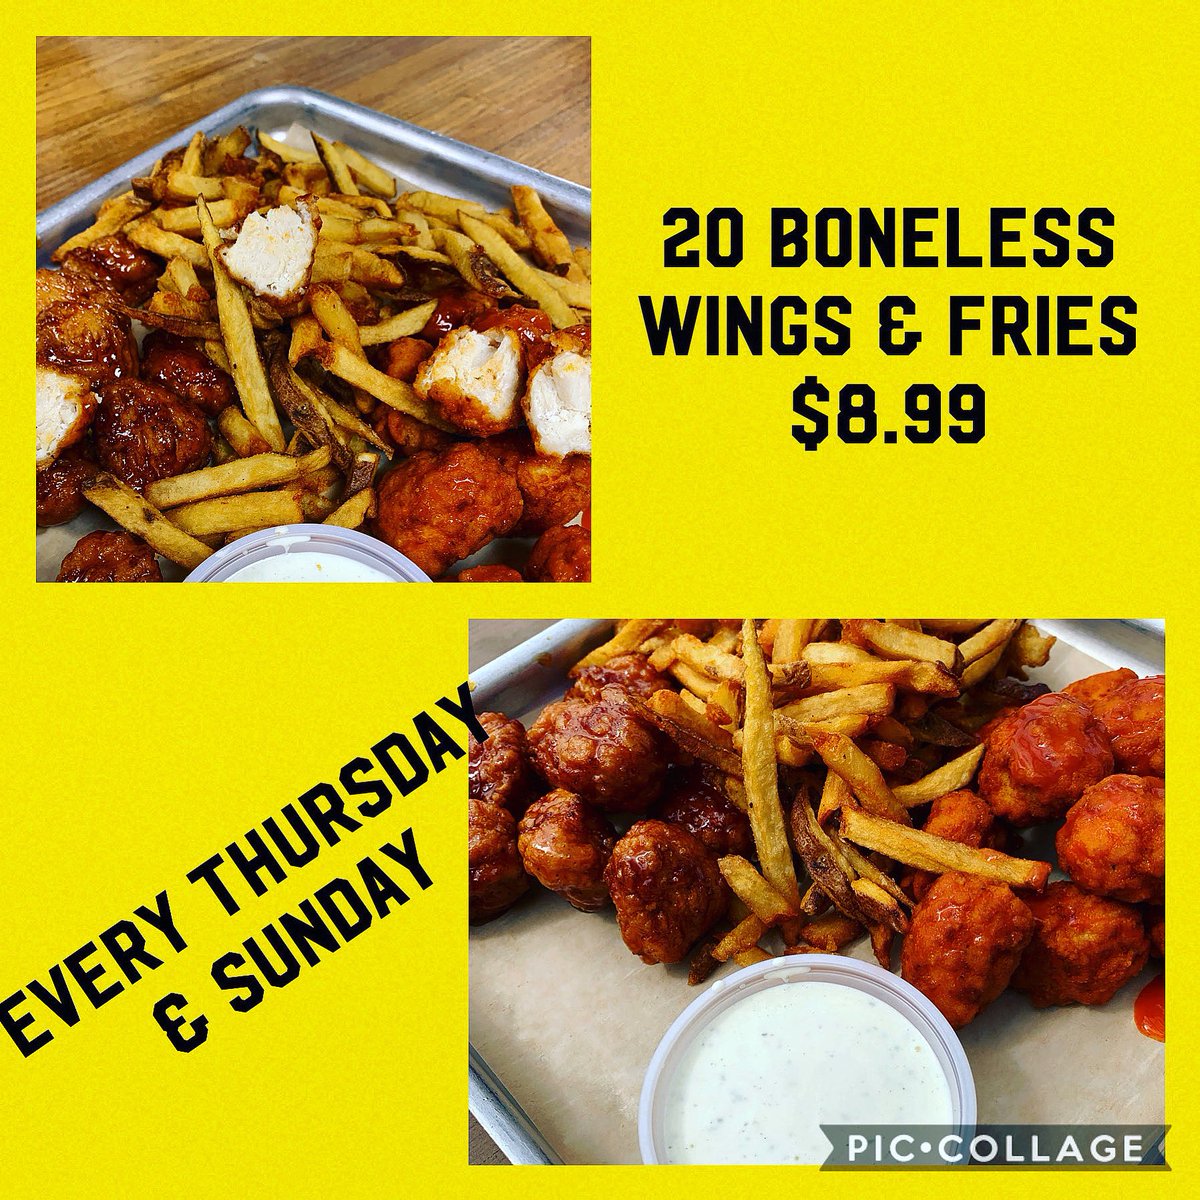 #1 #wing day in the #fourstates 20 #bonelesswings .35 + $1.99 #fries = $8.99.  🛑 eating flour.  #chatterslife in the ❤️ of every #smart wing eater.  More chicken less breading 🤗🥳🥳🥳